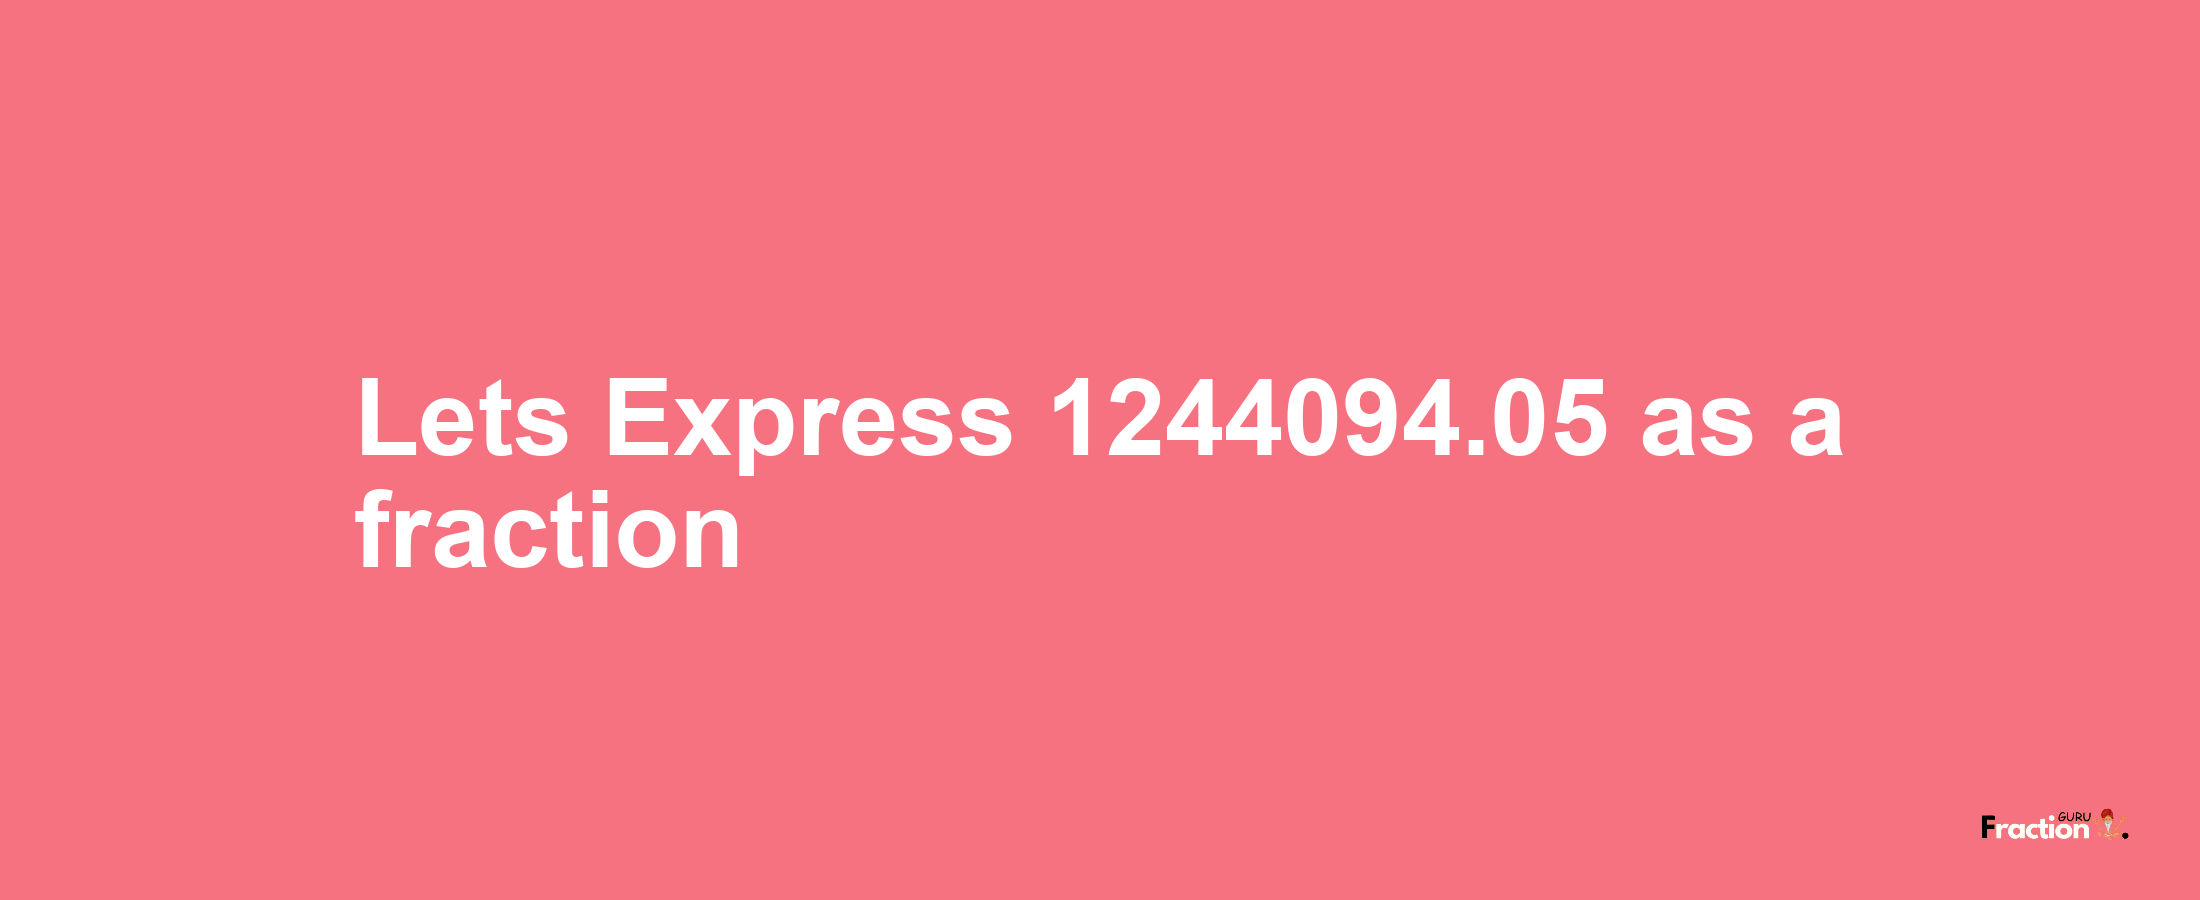 Lets Express 1244094.05 as afraction